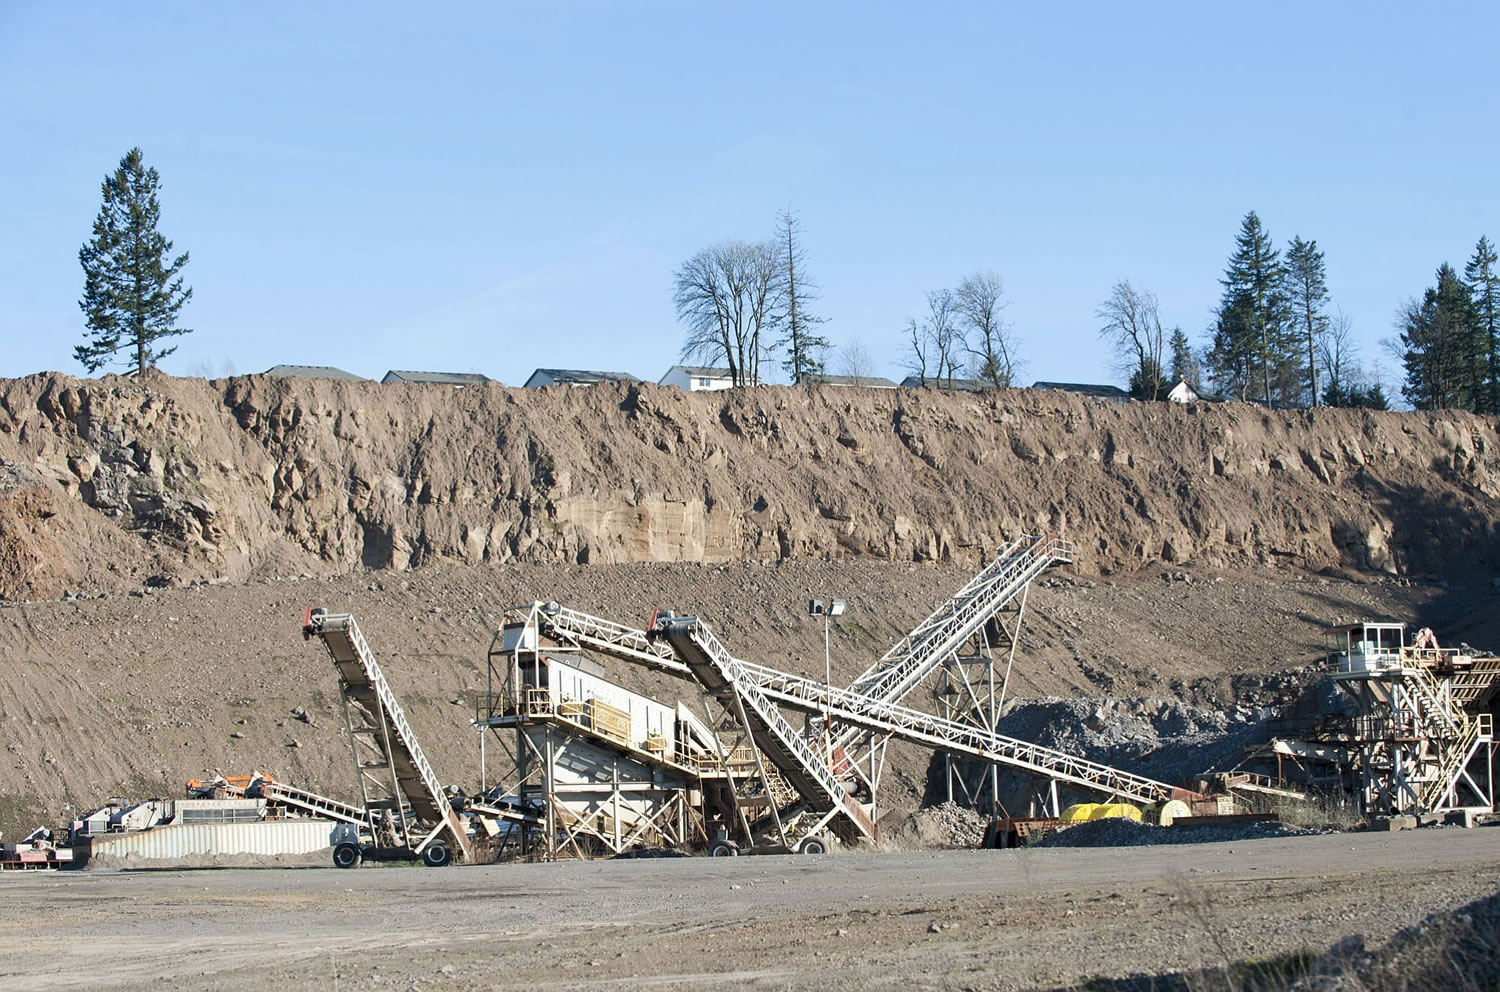 Mining continues at an 84-acre quarry on 192nd Ave. in Vancouver.